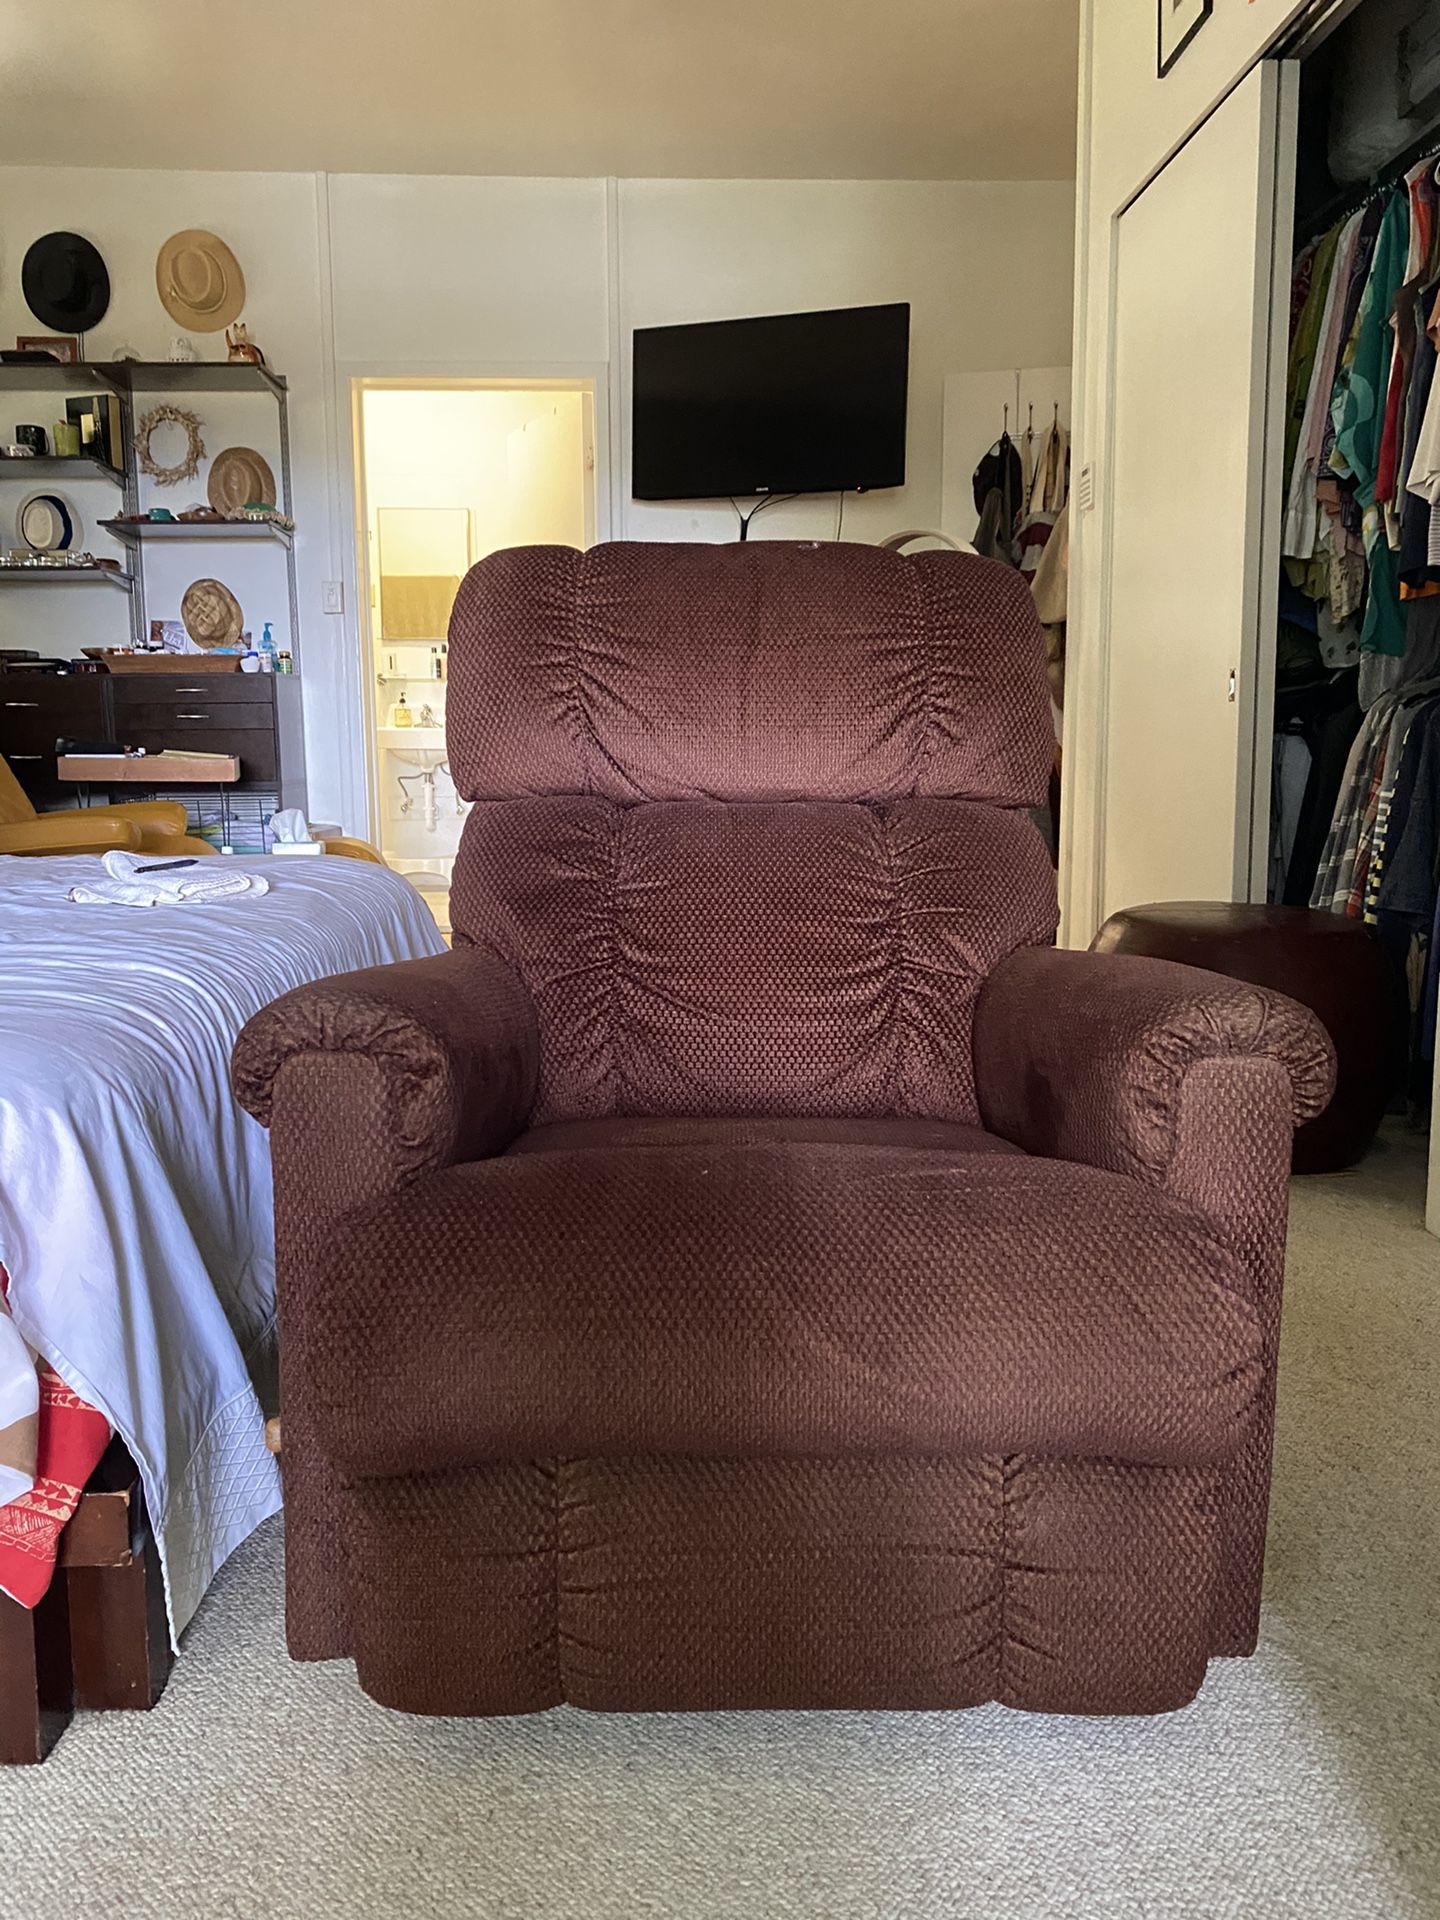 Recliner Chair Like New 